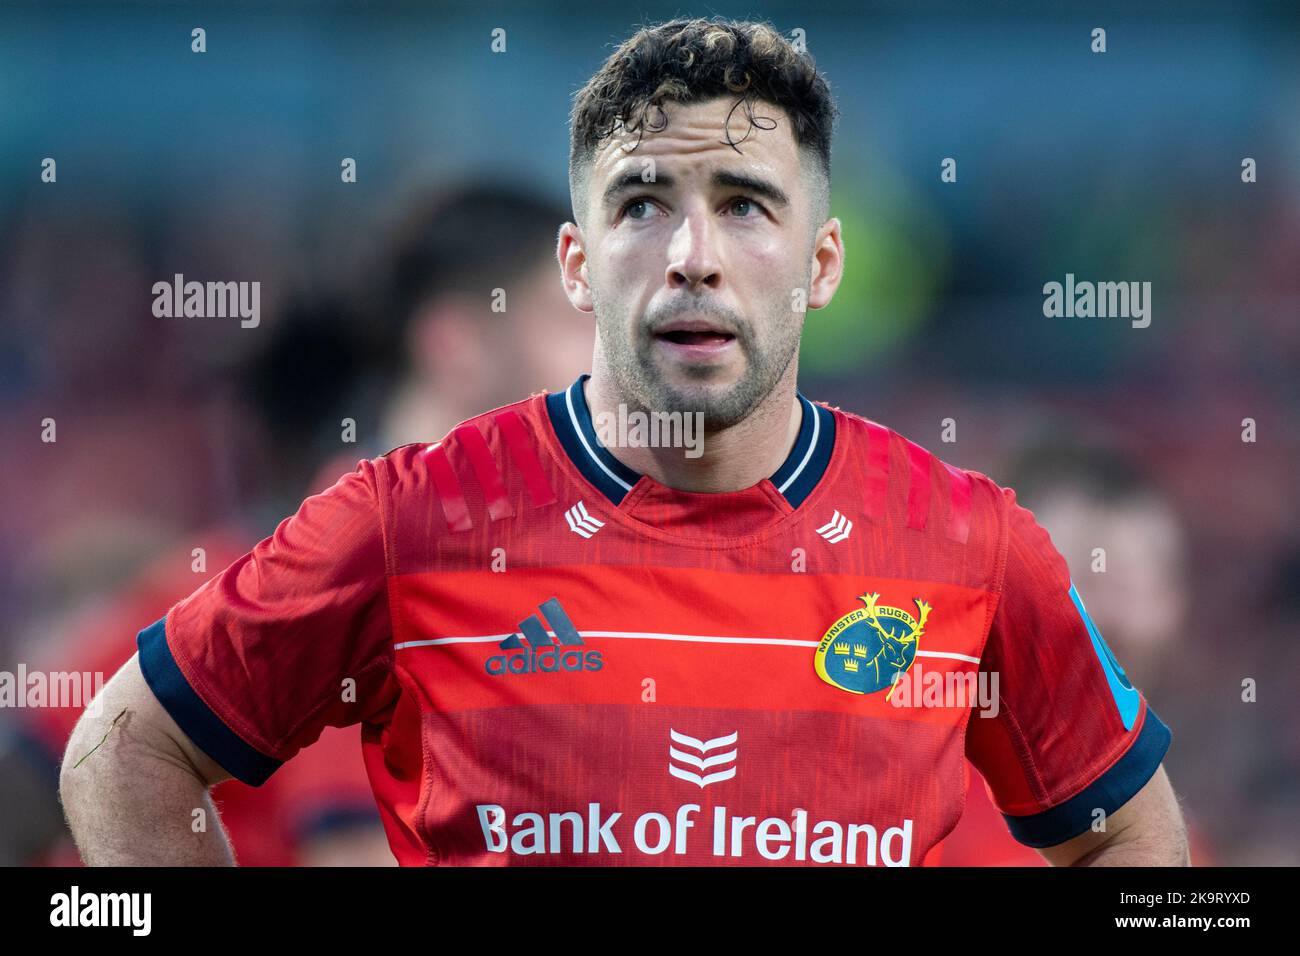 Paddy Patterson of Munster during the United Rugby Championship Round 7 match between Munster Rugby and Ulster Rugby at Thomond Park in Limerick, Ireland on October 29, 2022 (Photo by Andrew SURMA/